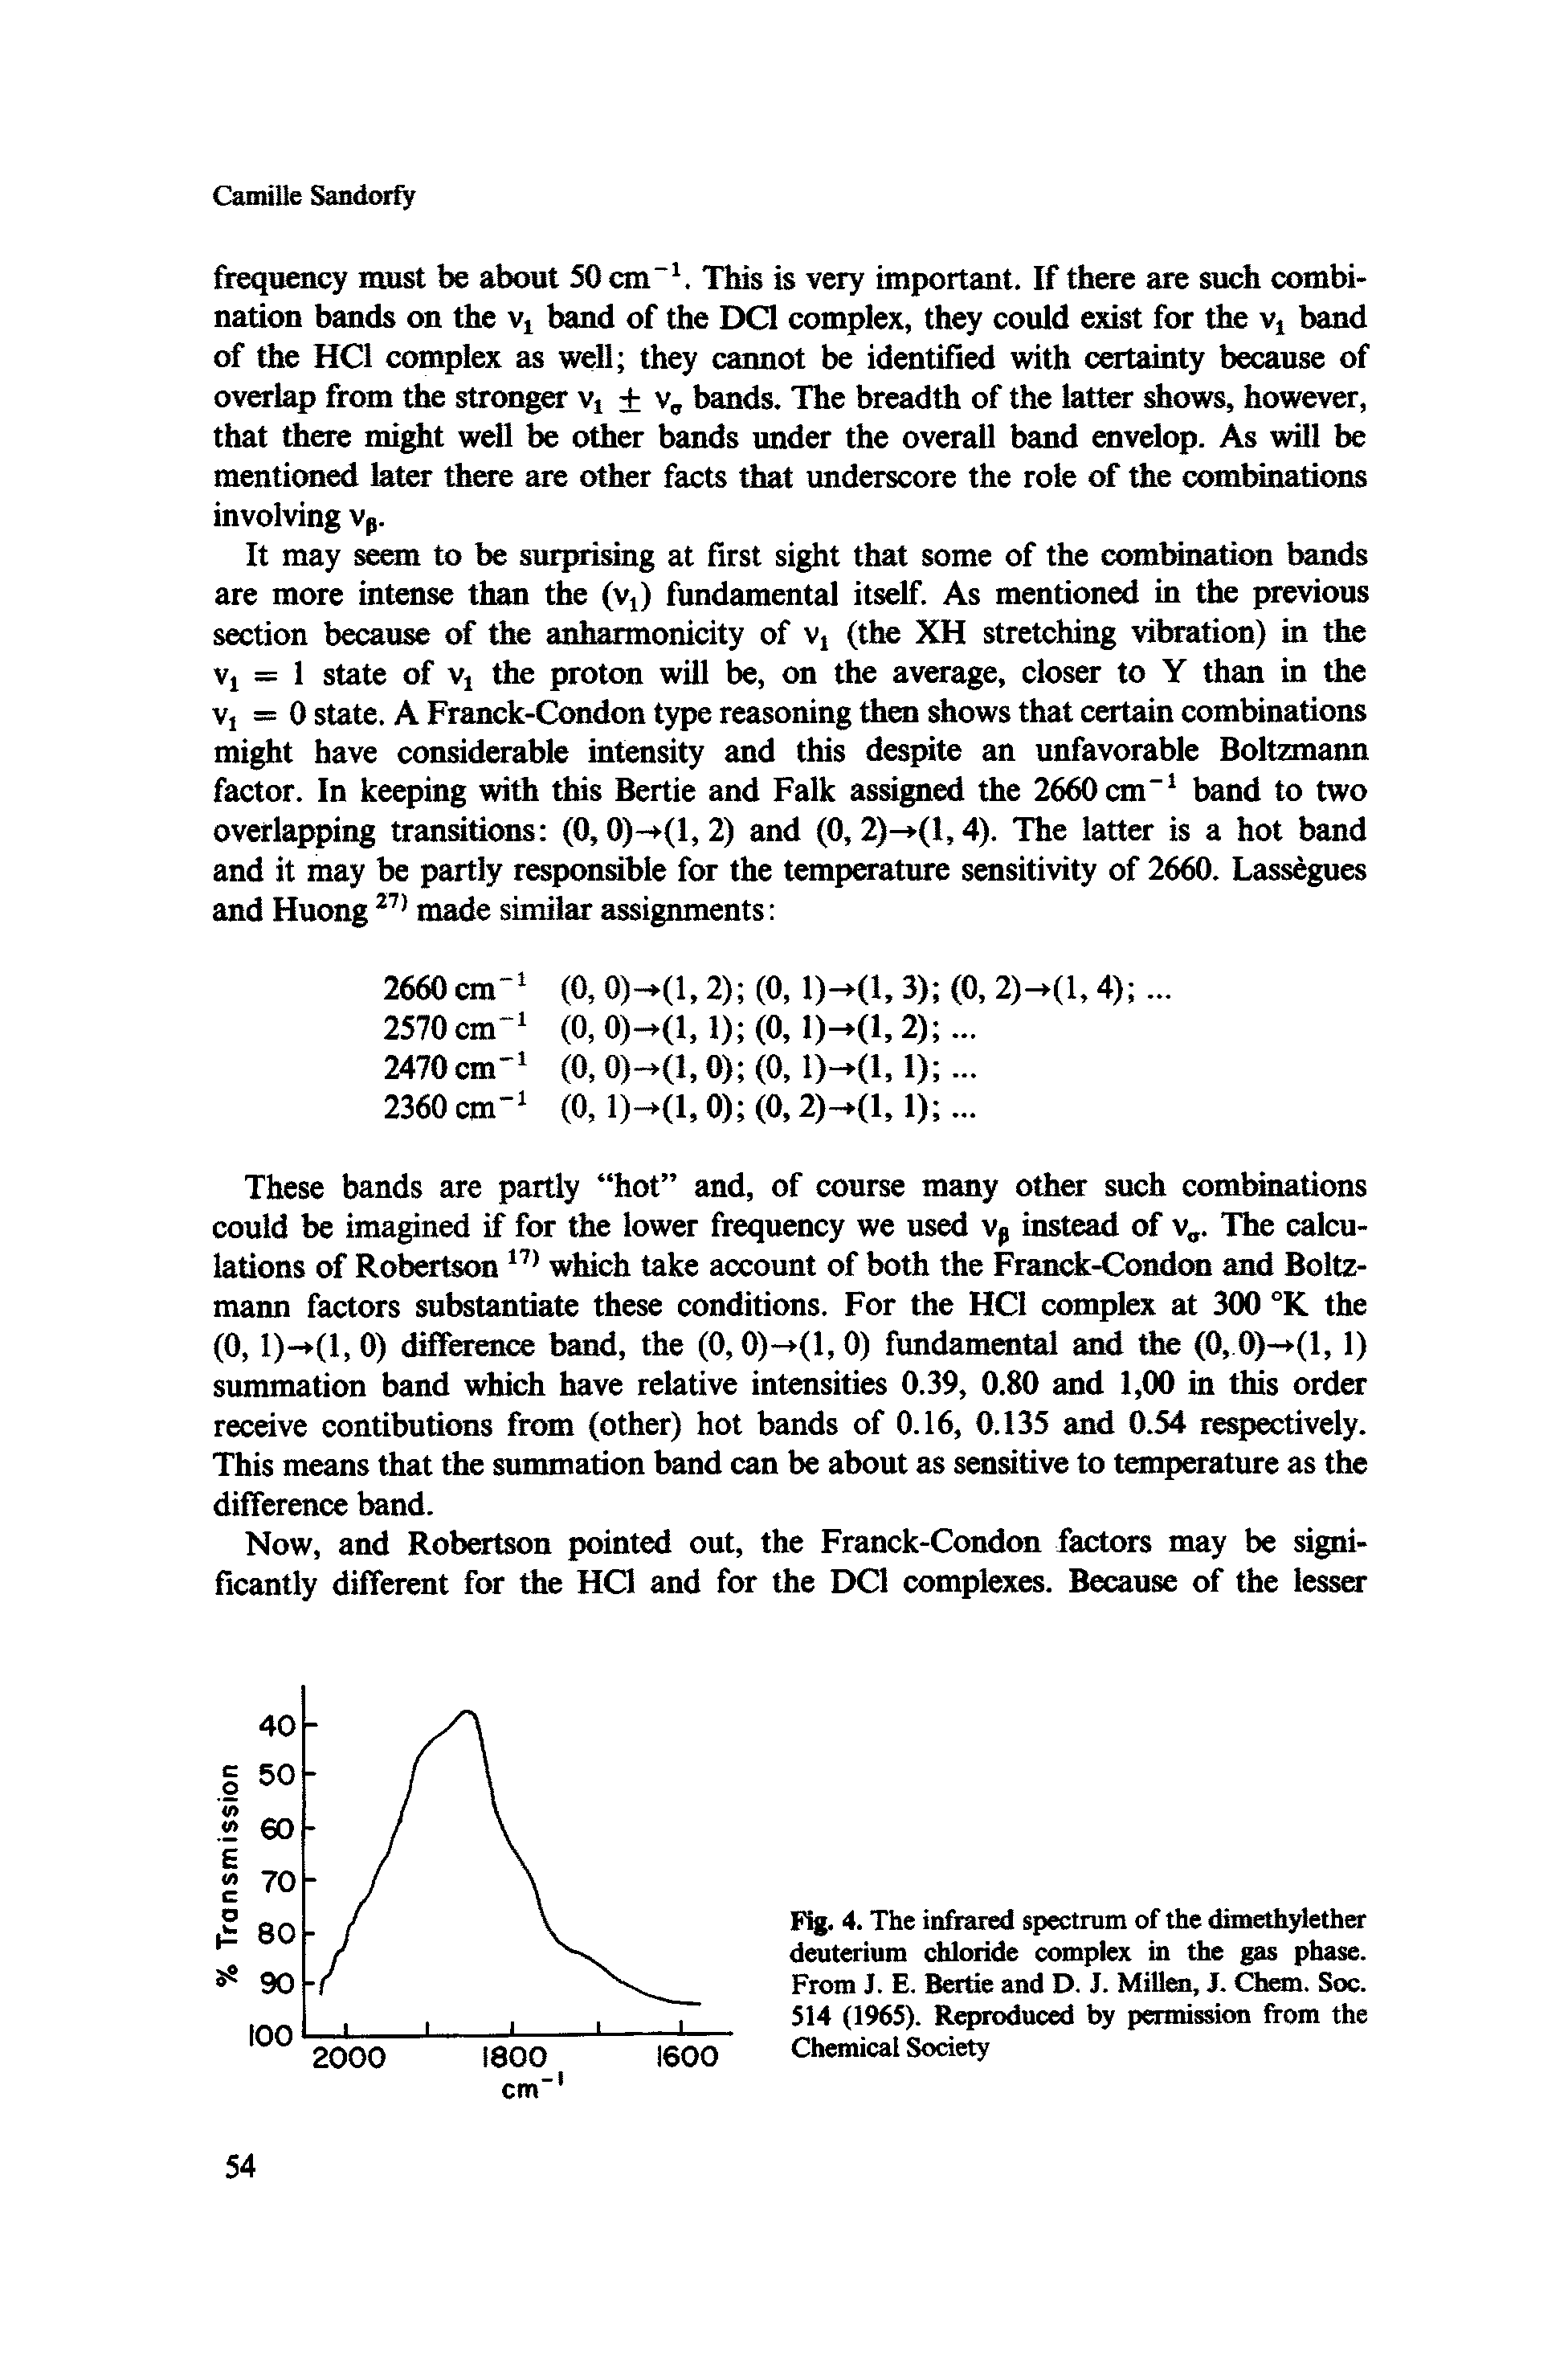 Fig. 4. The infrared spectrum of the dimethylether deuterium chloride complex in the gas phase. From J. E. Bertie and D. J. Millen, J. Chem. Soc. 514 (1965). Reproduced by permission from the Chemical Society...